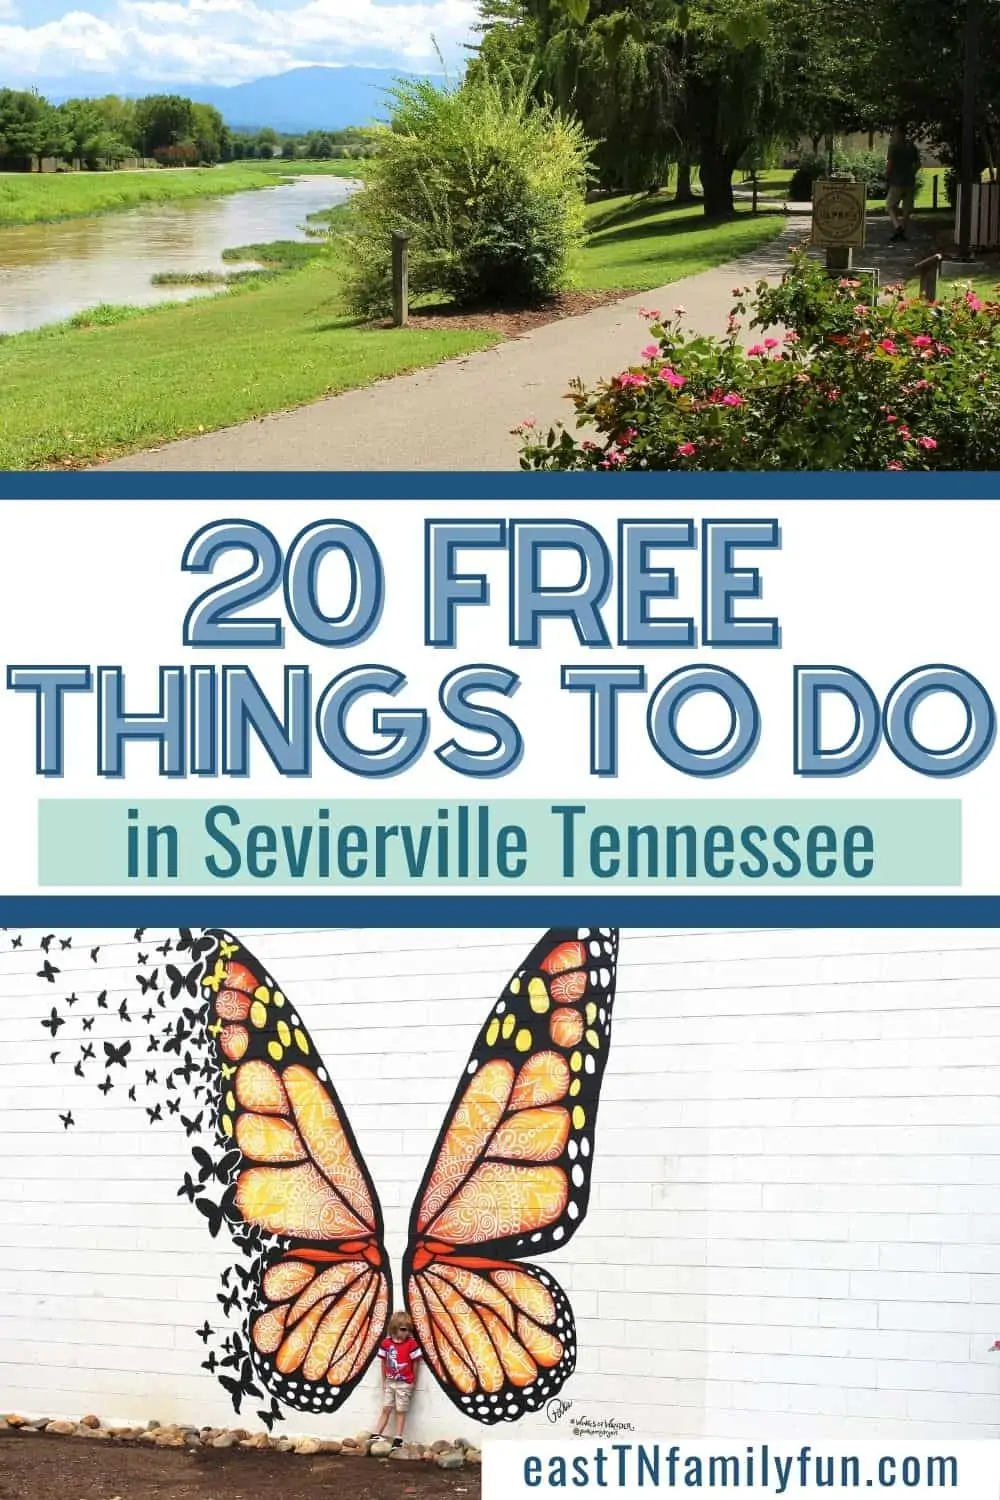 20 FREE Things to Do in Sevierville TN